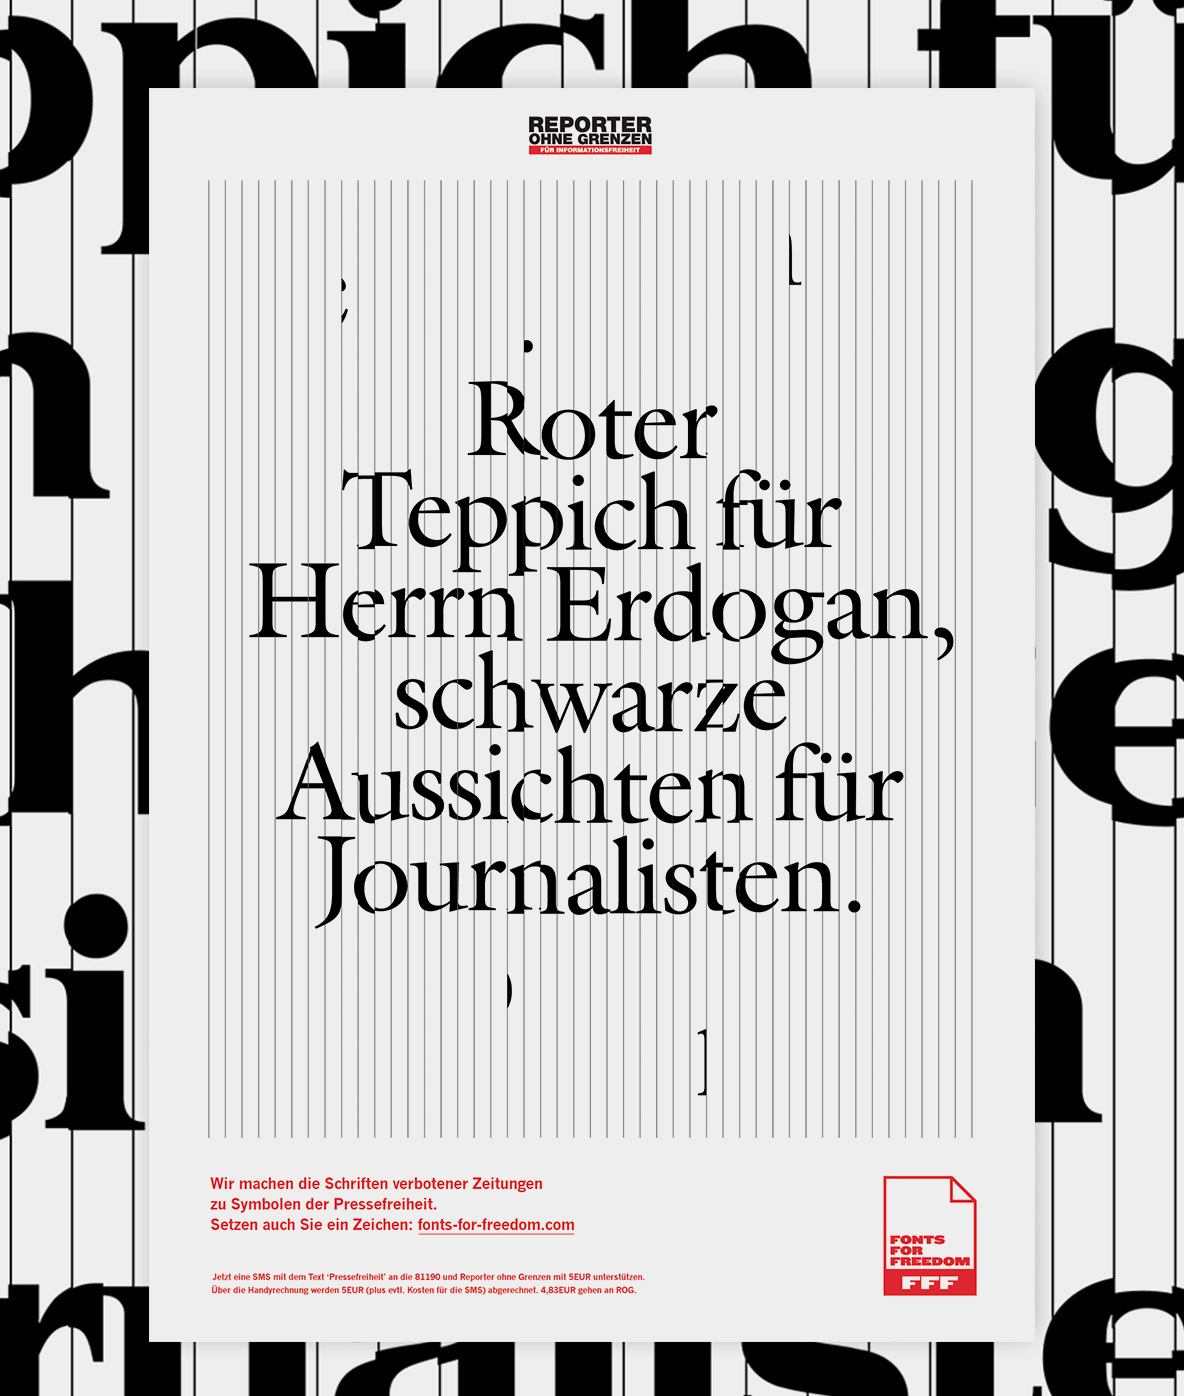 Reporters without borders – Fonts for Freedom